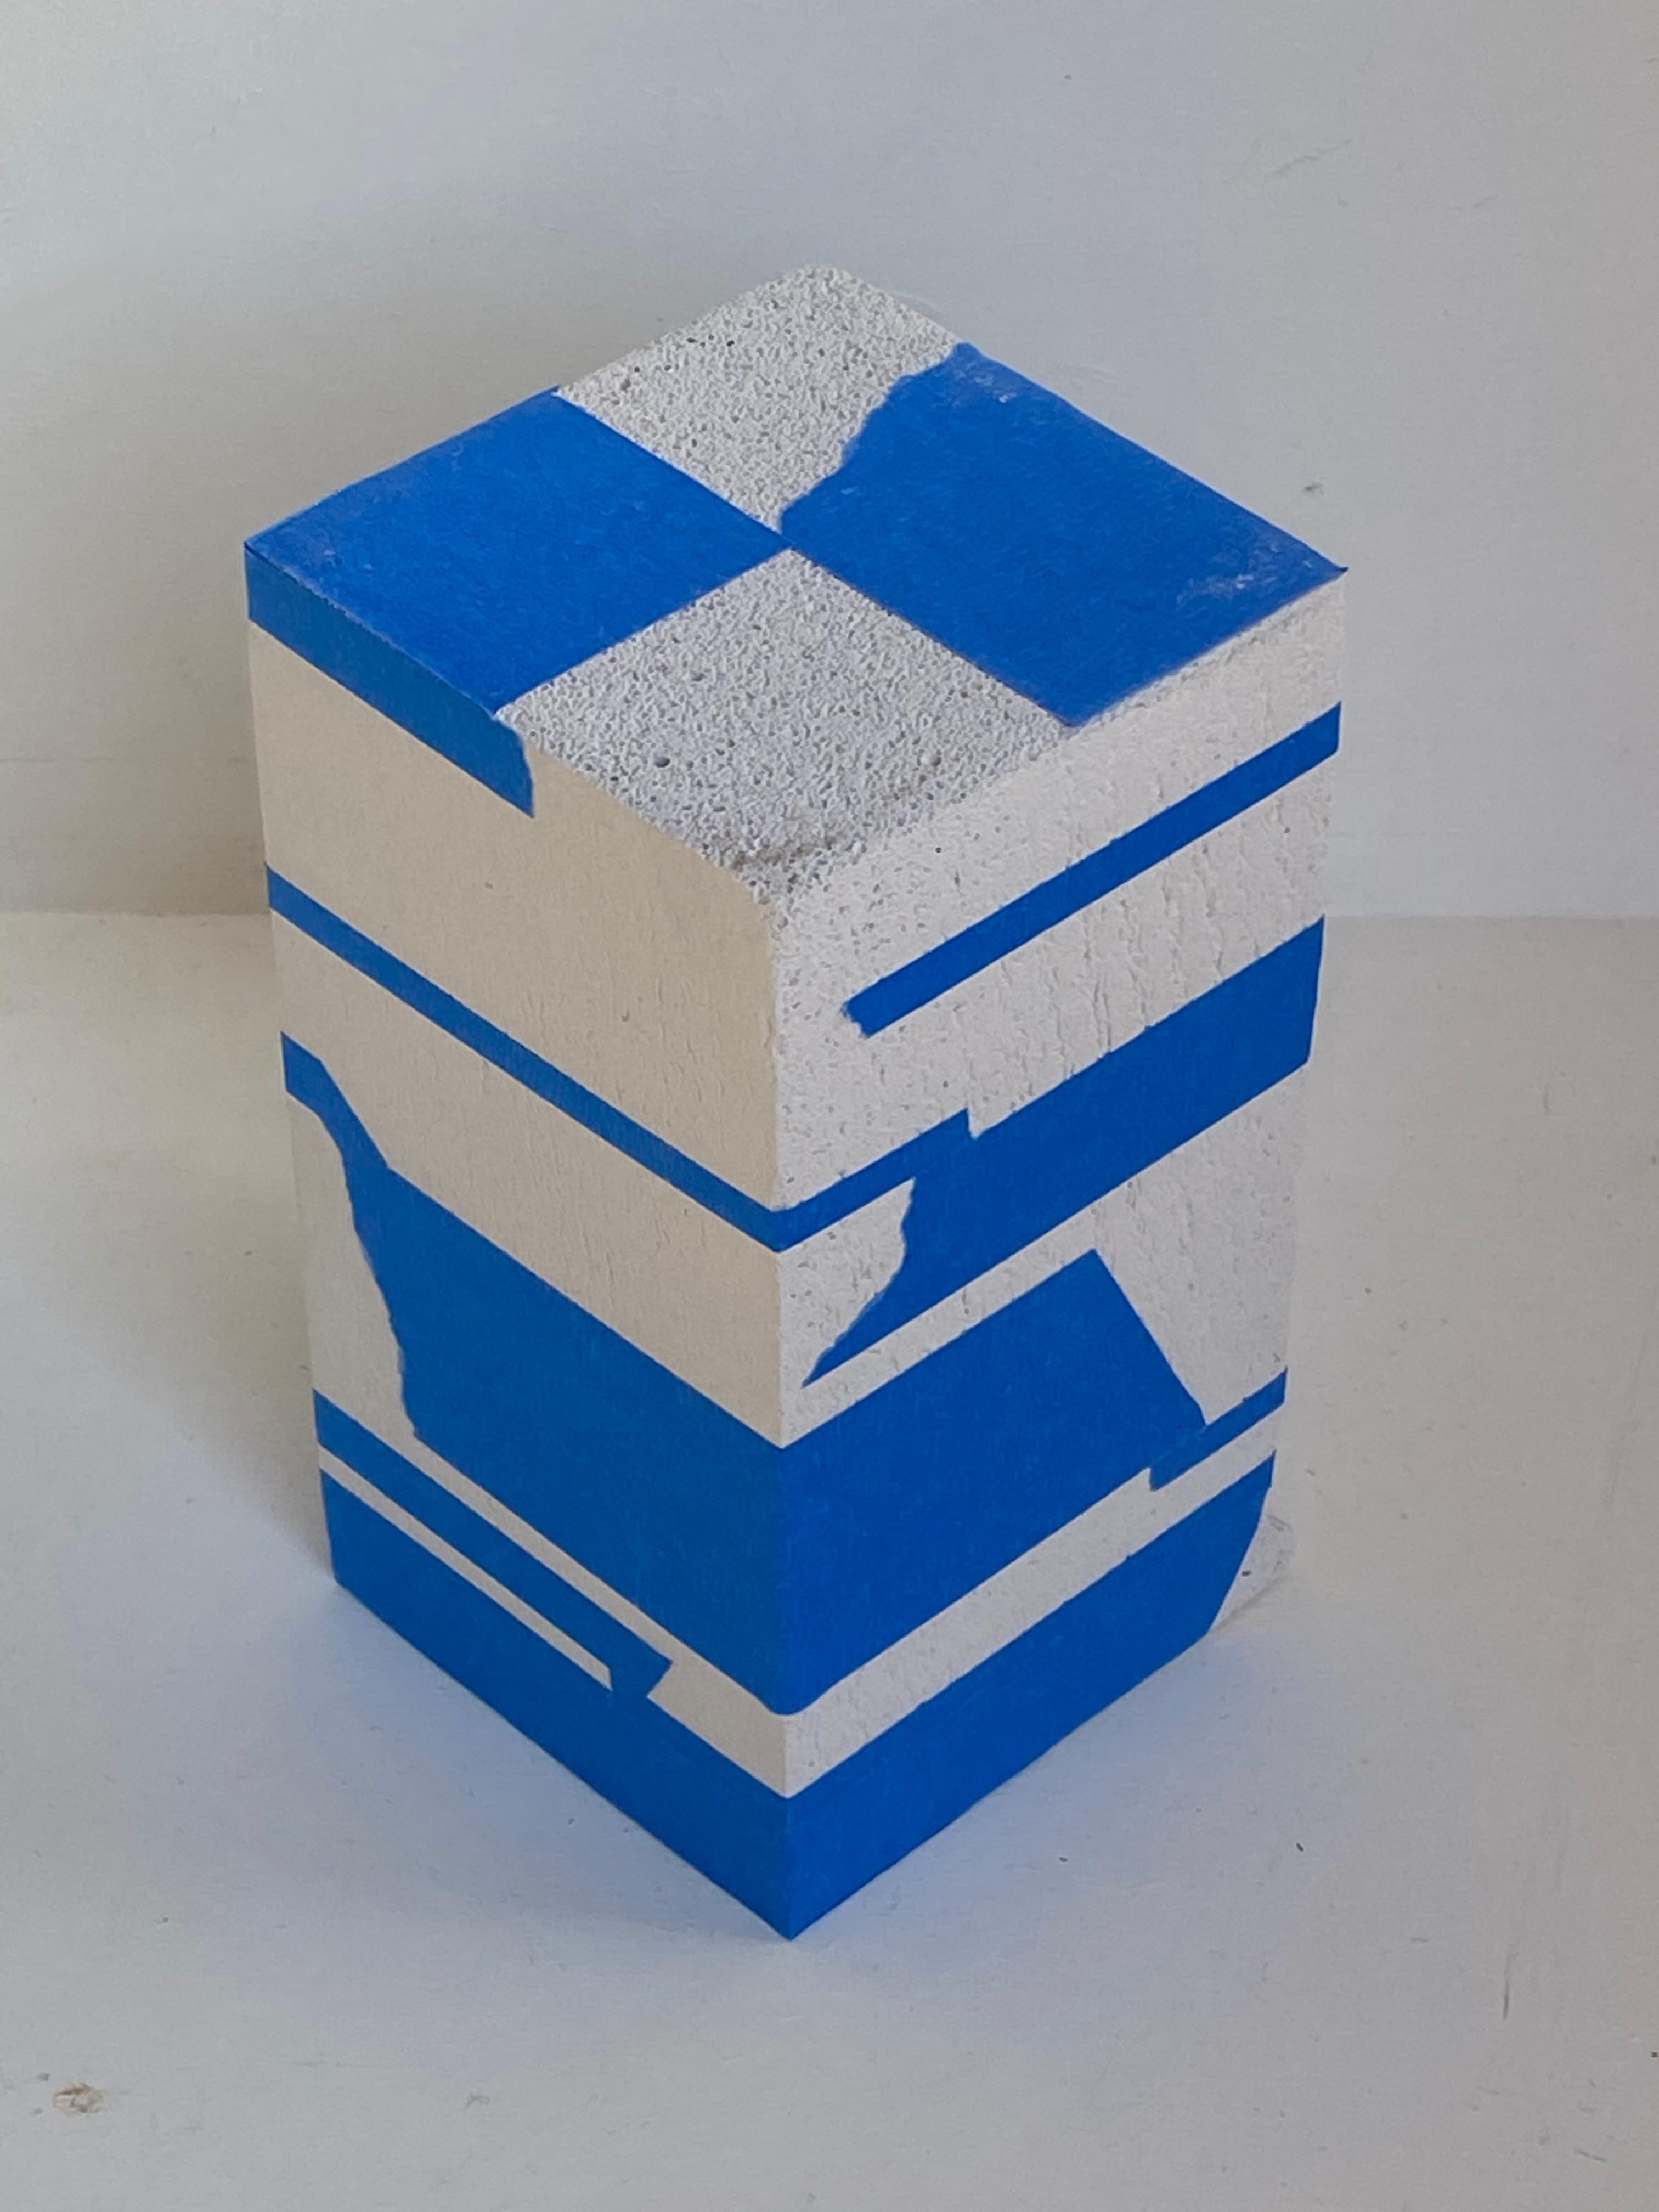 Work N° 4 by Kevin Cheng-Feng YU 

1) Untitled
2) Cellular concrete, blue tape
3) Year of creation : 2020
4) 10X9,7X18,2cm
5) signed on the scotch tape
6) Unique copy 
7) 1100 euros for the artist